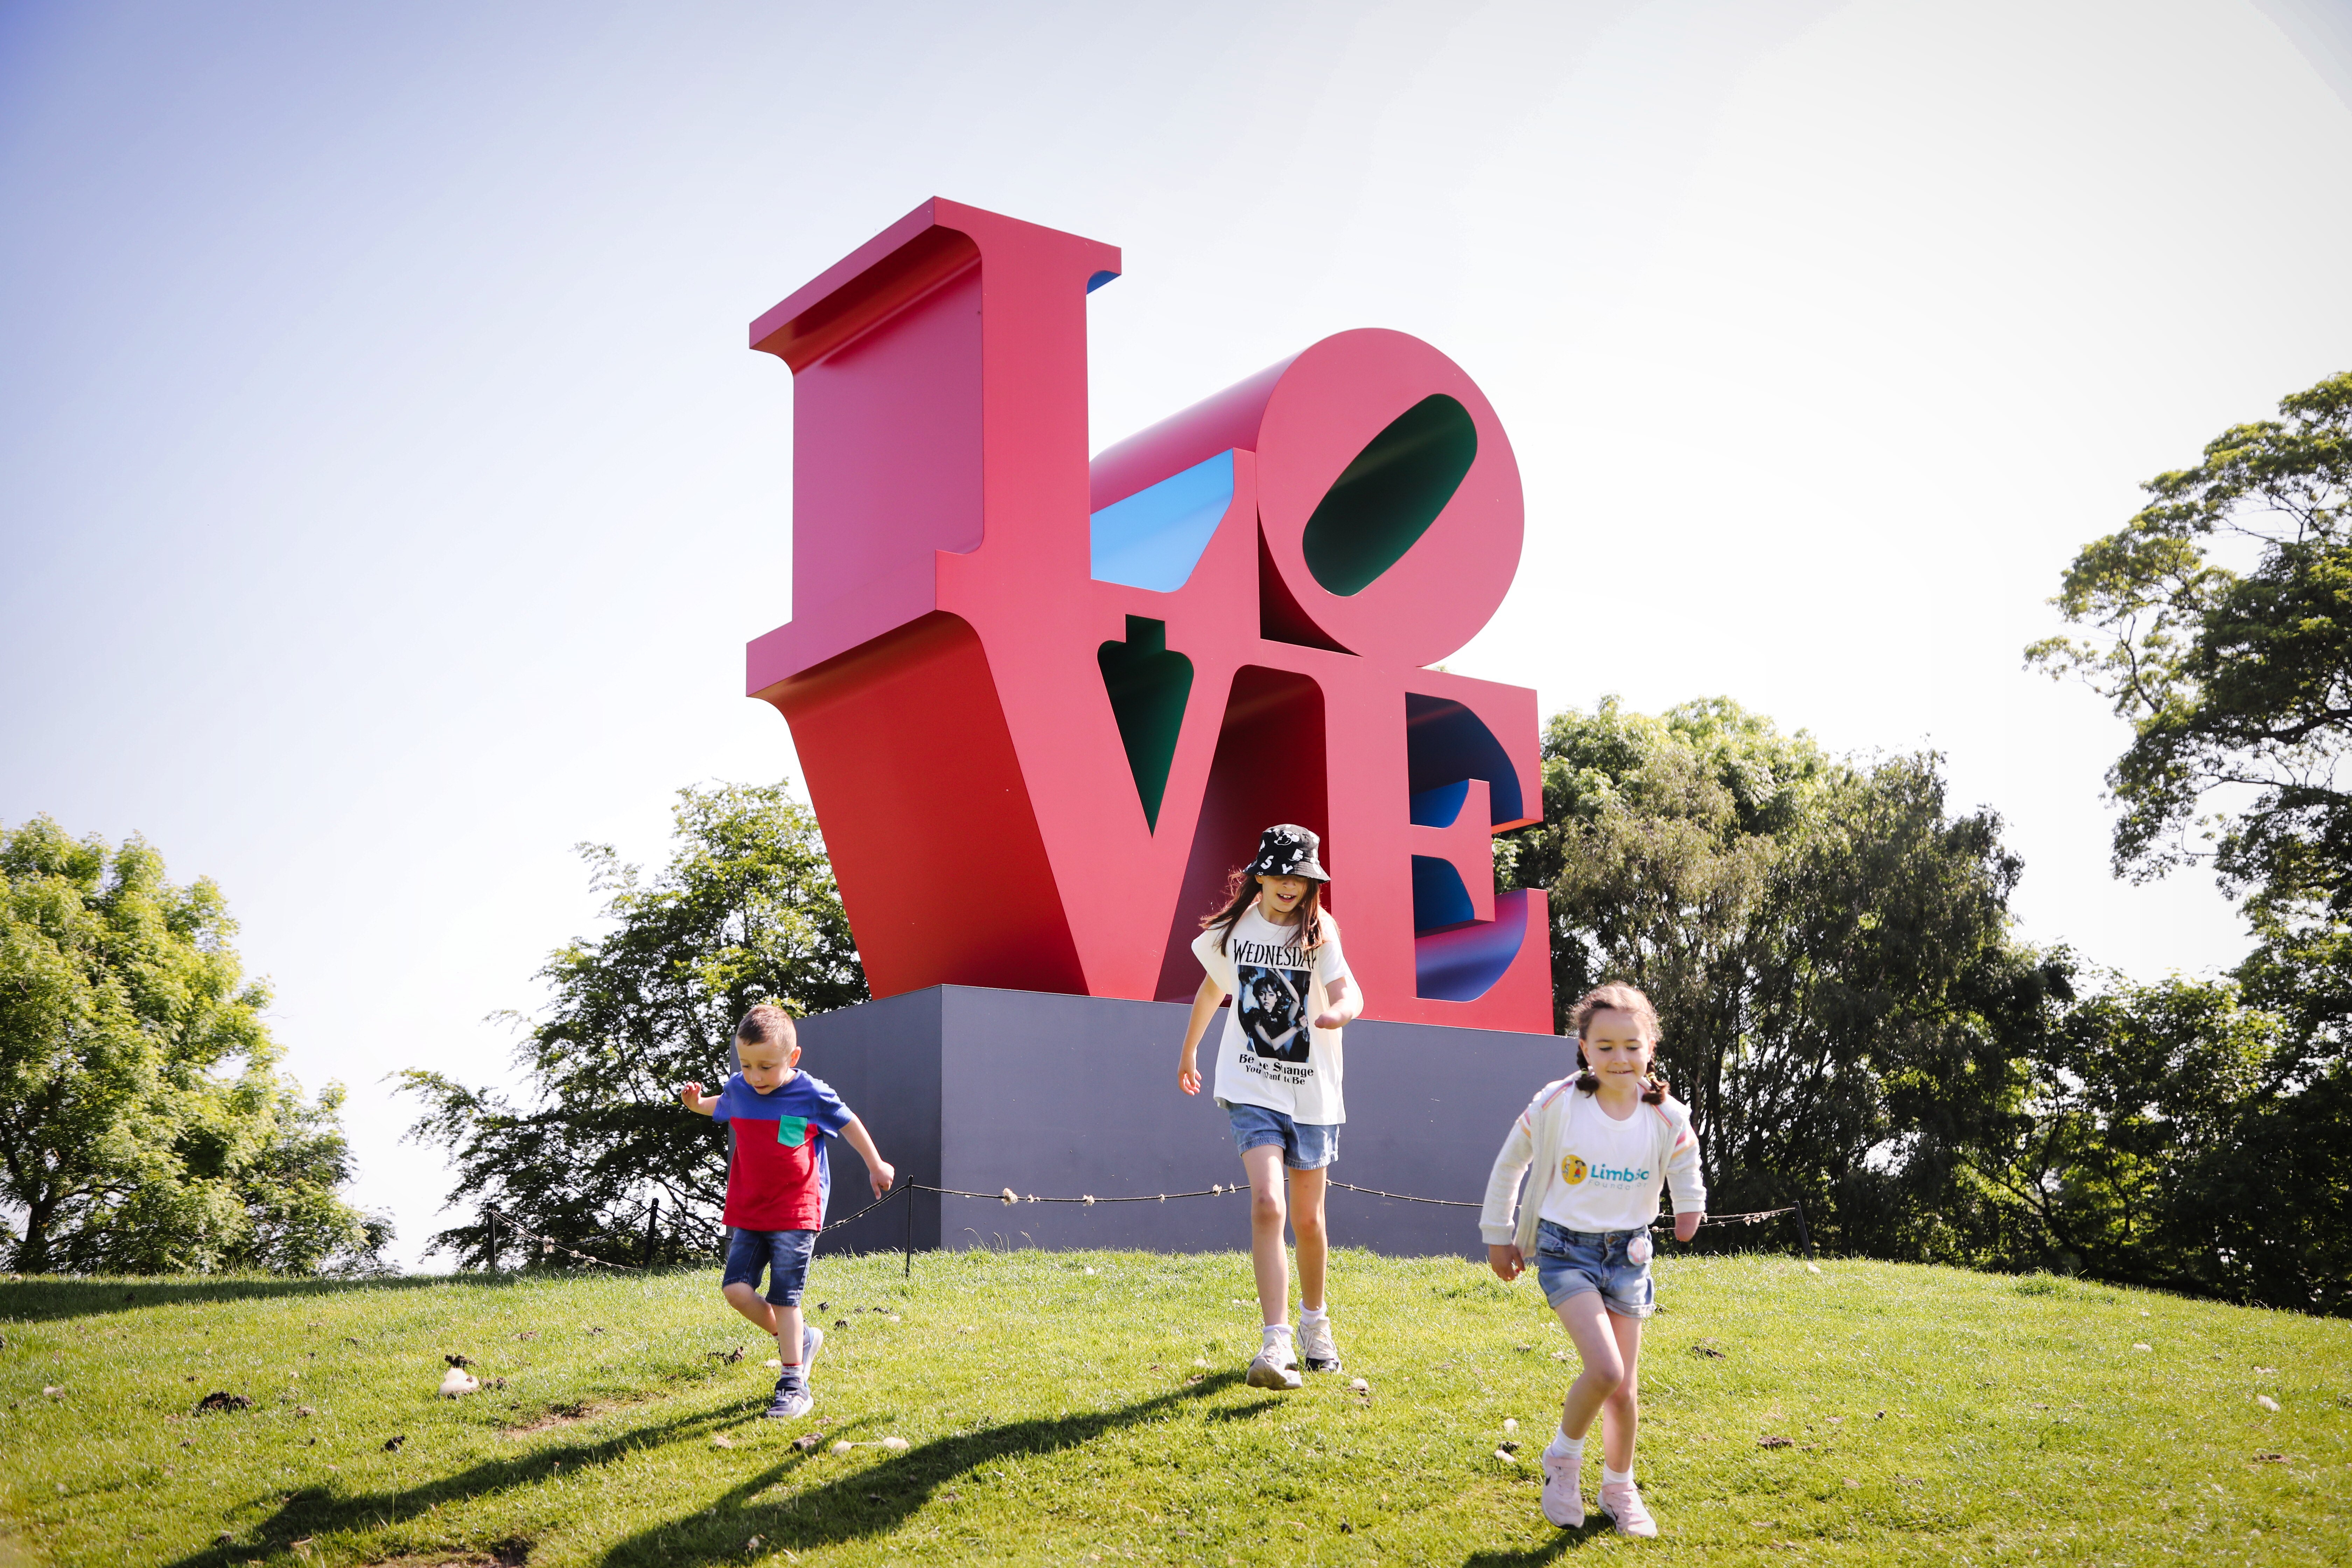 Children running down a hill in front of a large red LOVE sculpture by Robert Indiana